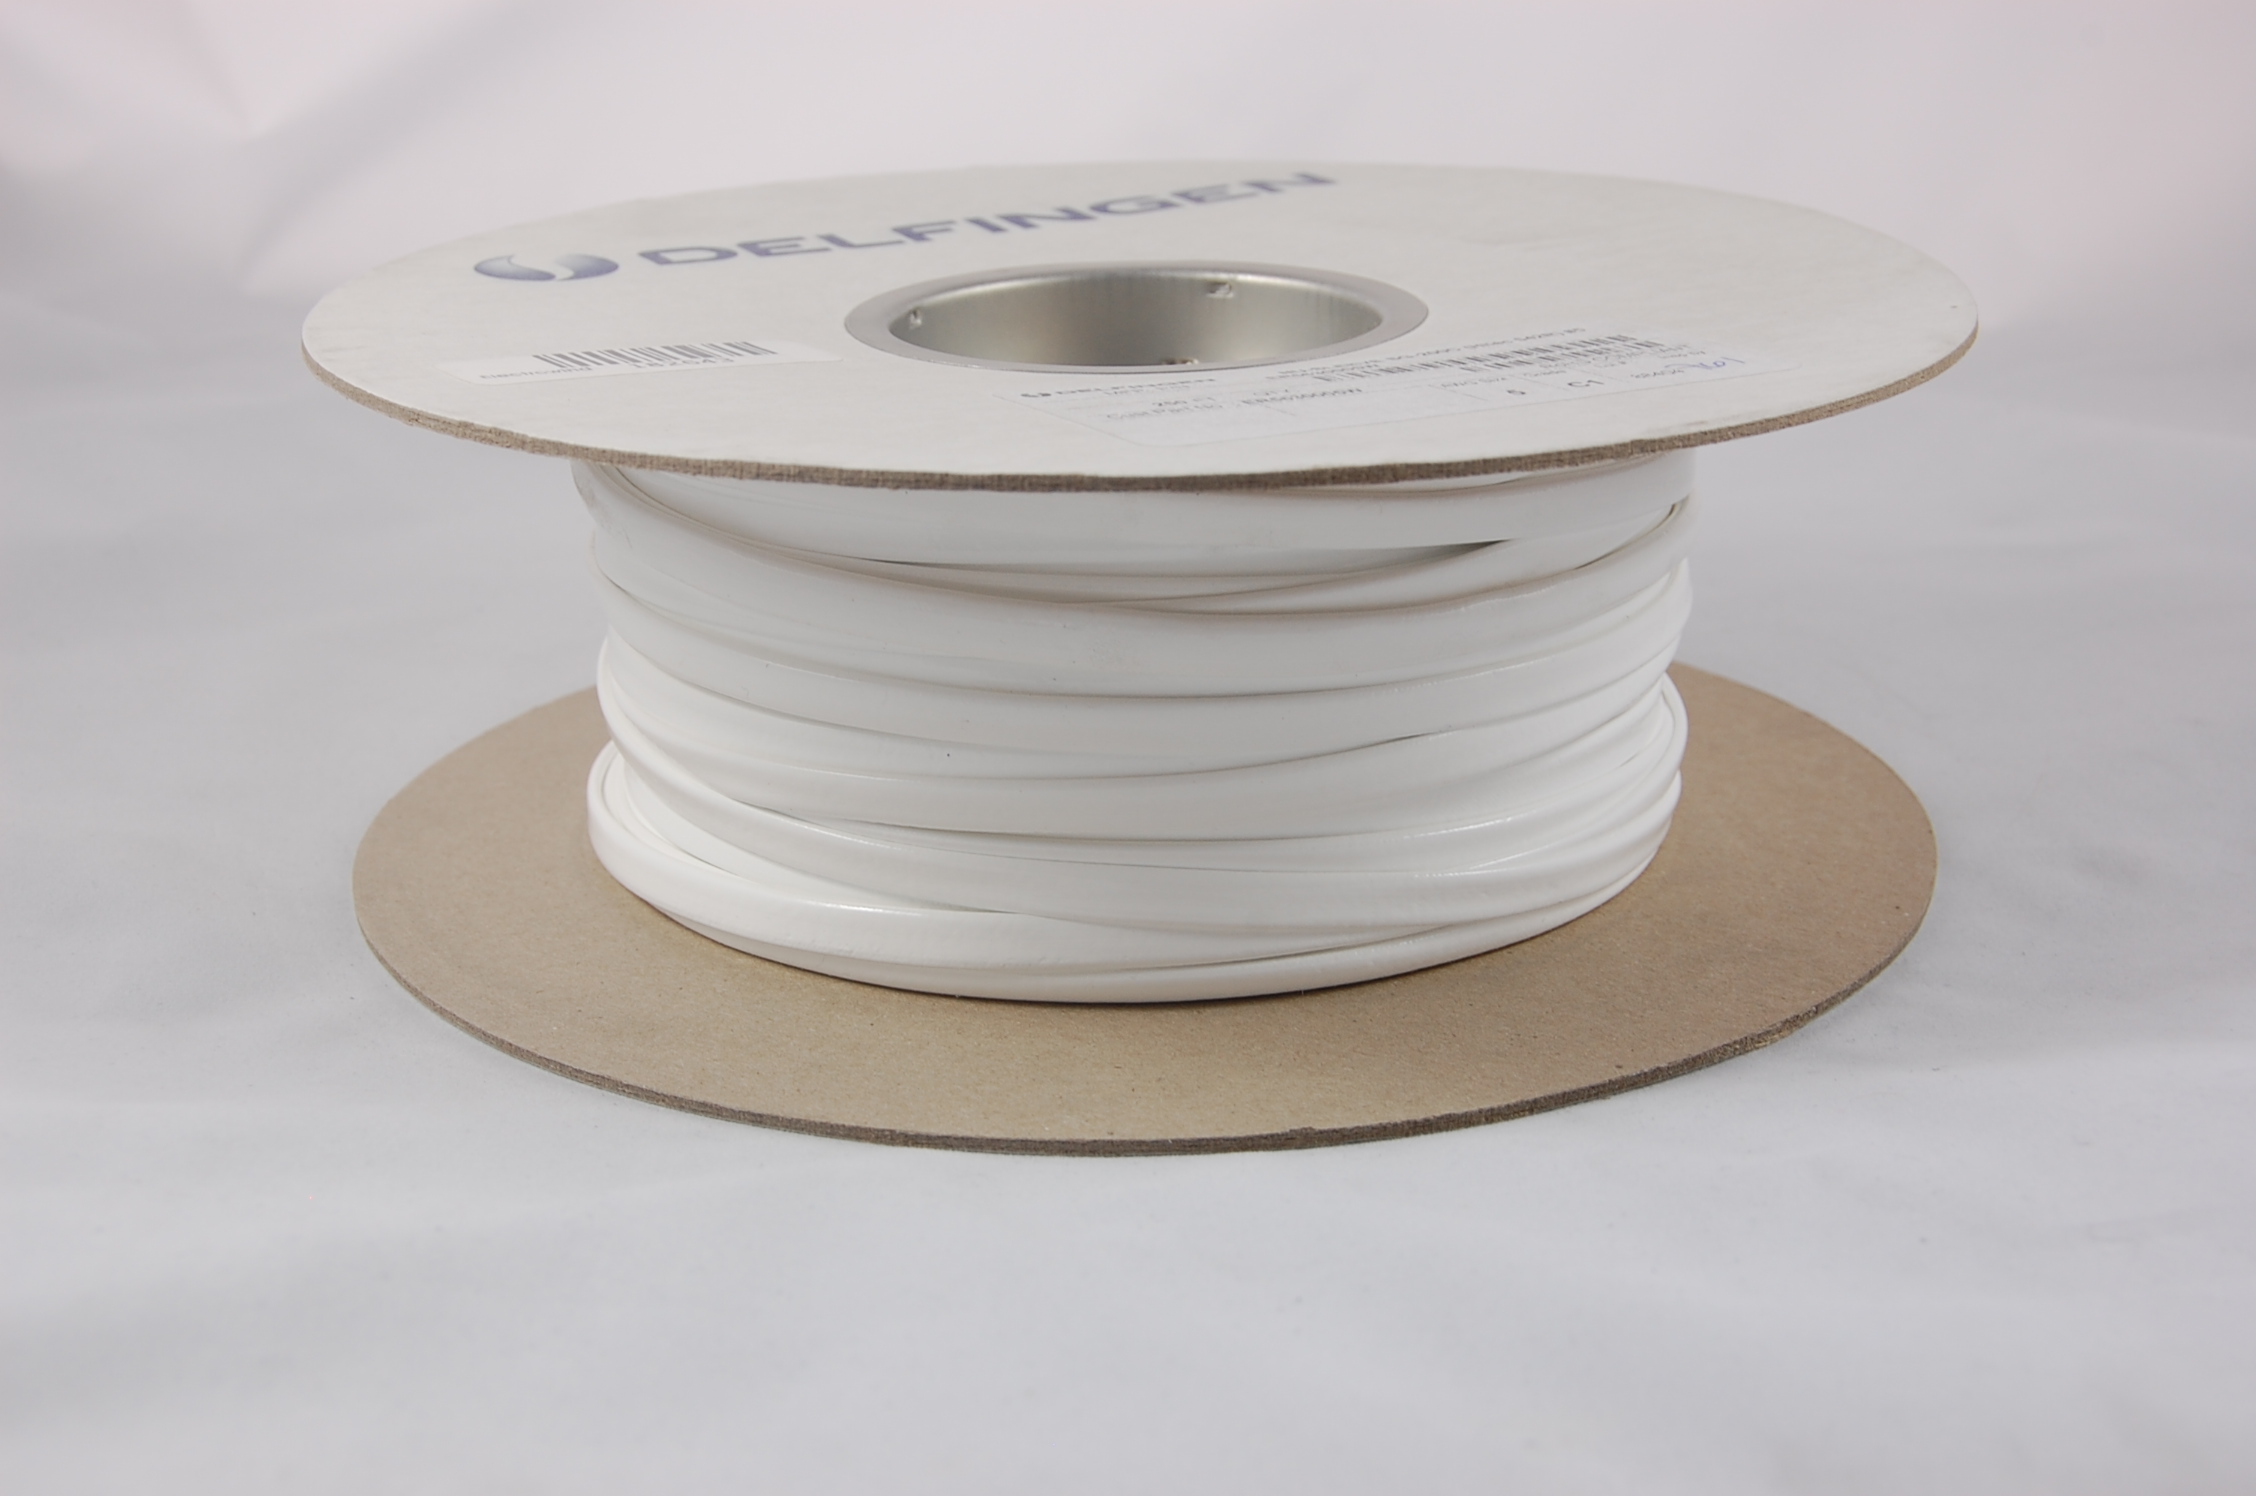 #0 AWG NU-SLEEVE SG-200 C-1 (2500V) Silicone Rubber Coated Braided Fiberglass Sleeving (542F) 200°C, white, 100 FT per spool